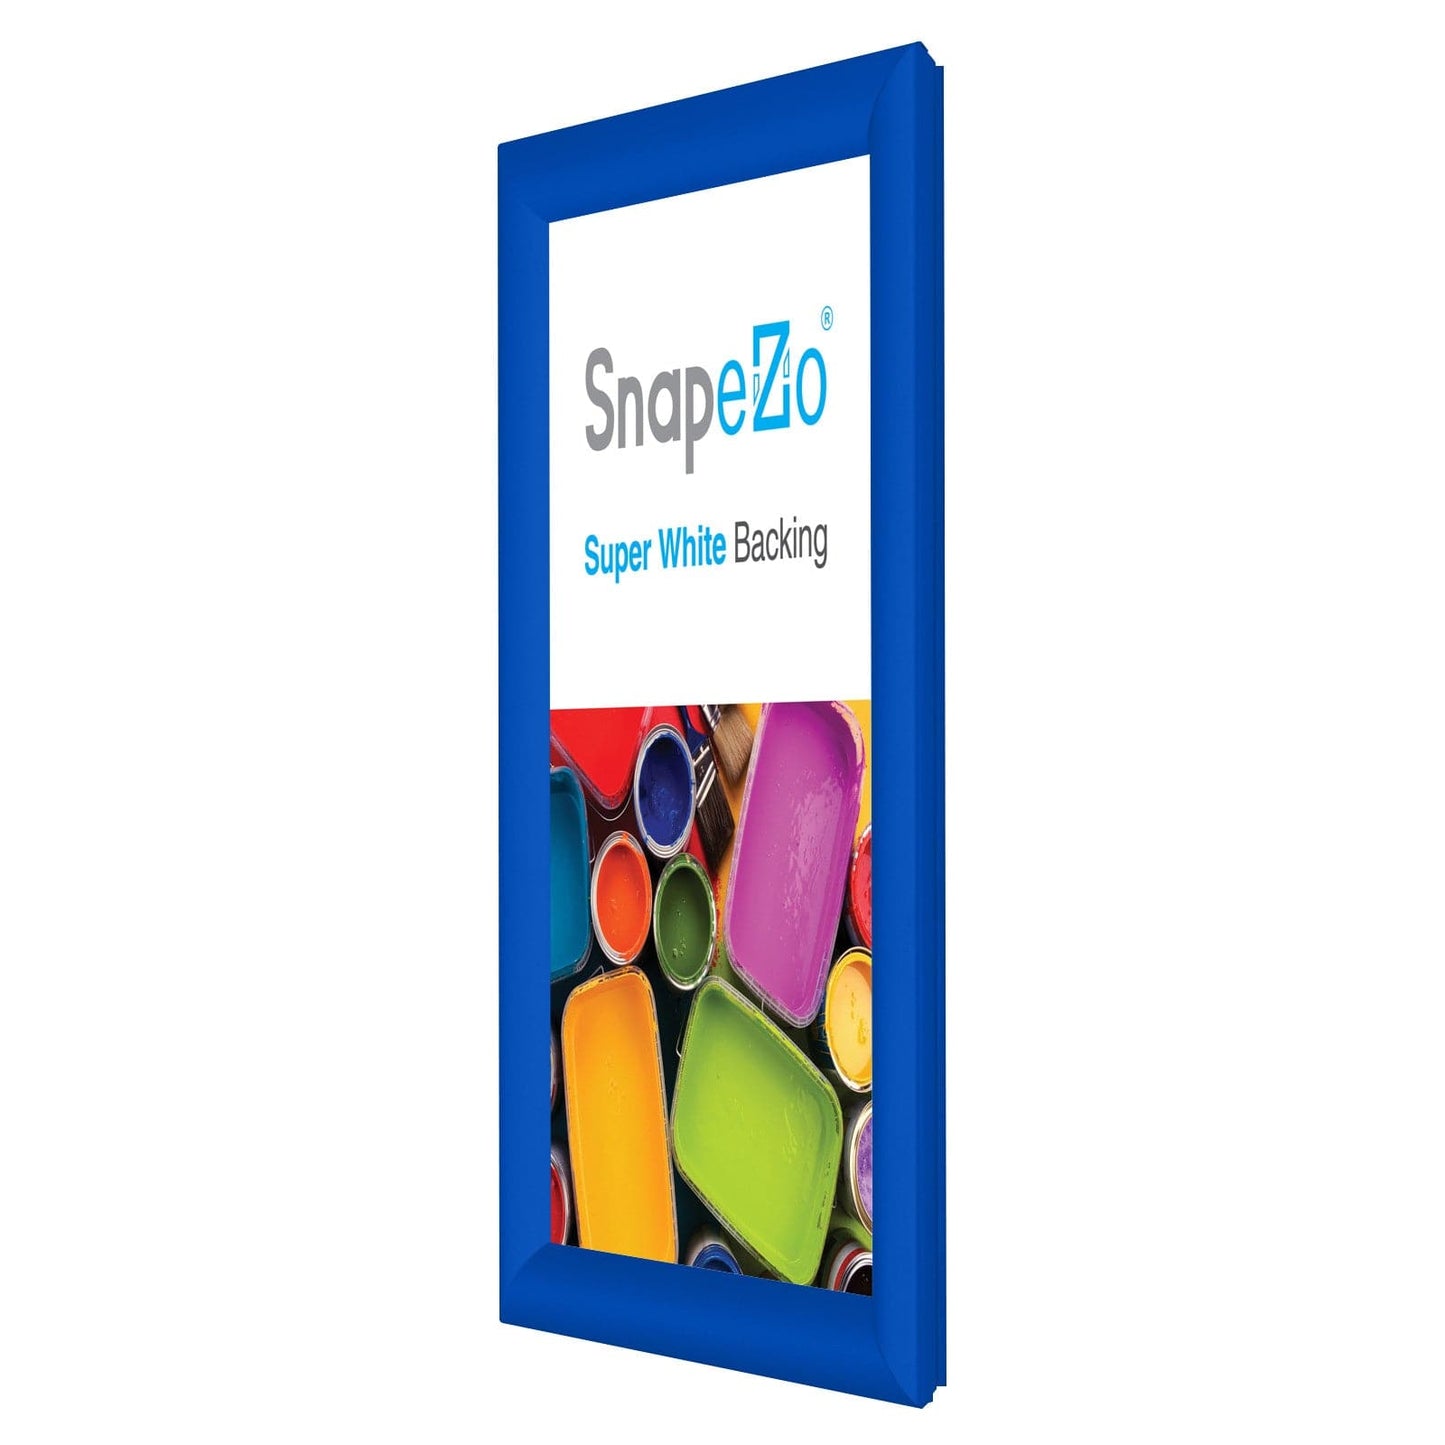 8.5x14 Blue SnapeZo® Snap Frame - 1.2" Profile - Snap Frames Direct